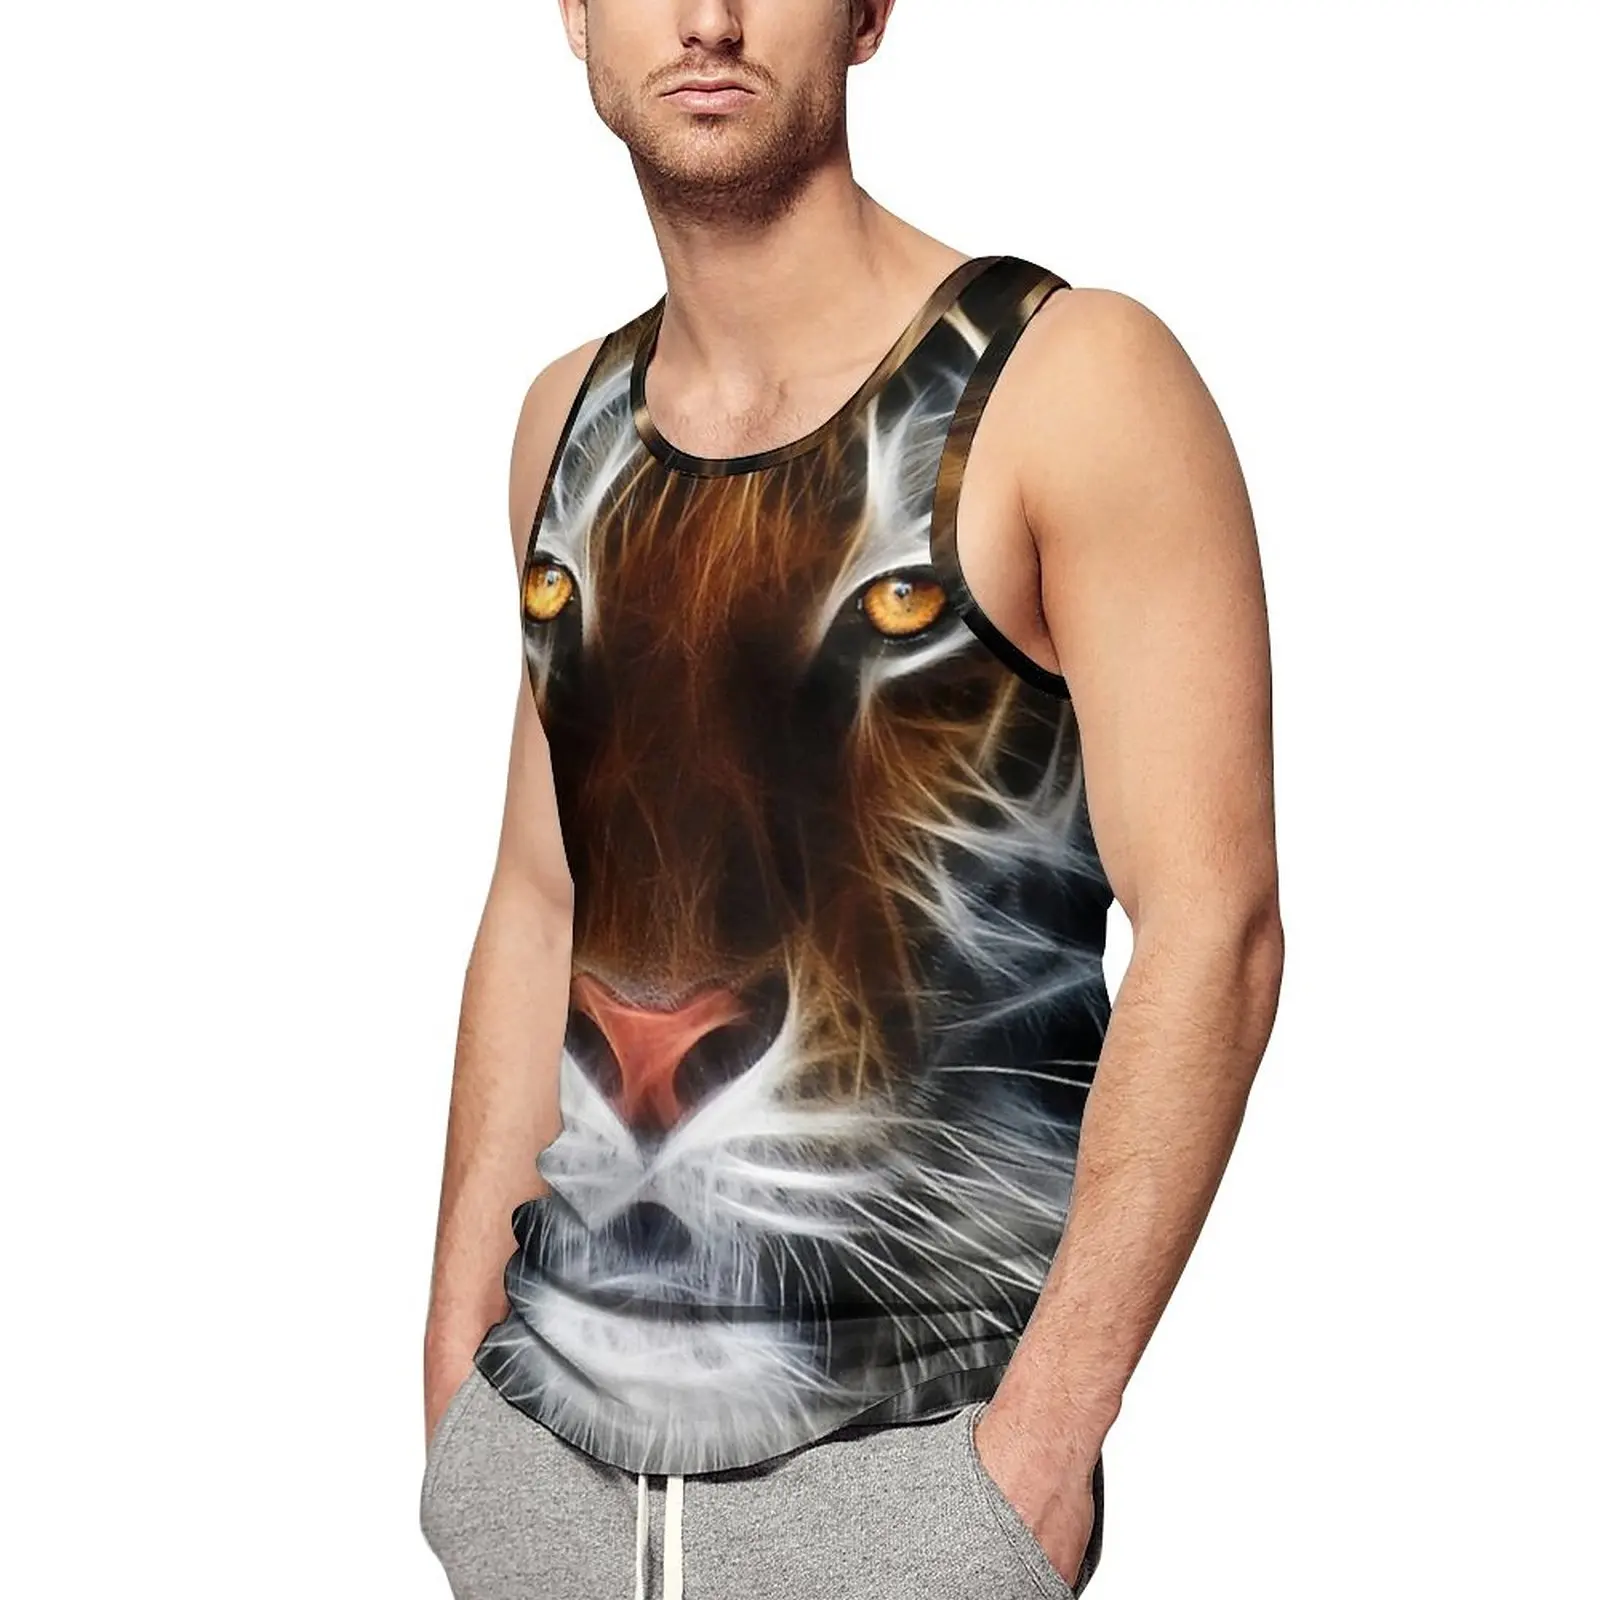 

Cool Tiger Print Daily Tank Top Abstract Animal Art Bodybuilding Tops Males Custom Trendy Sleeveless Vests Plus Size 4XL 5XL